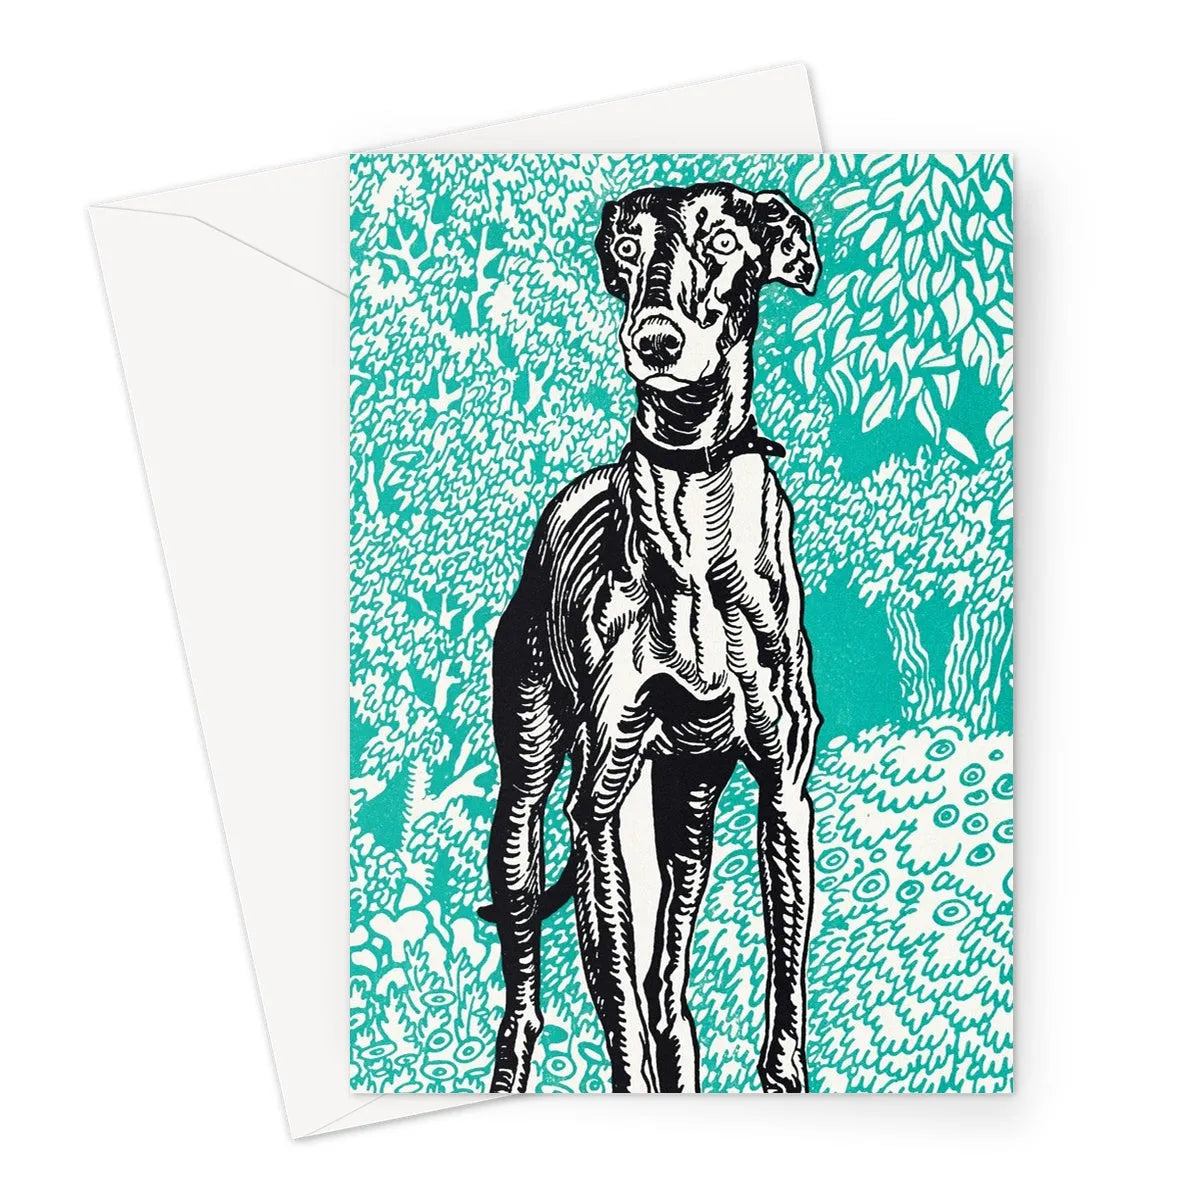 Greyhound By Moriz Jung Greeting Card - A5 Portrait / 1 Card - Greeting & Note Cards - Aesthetic Art